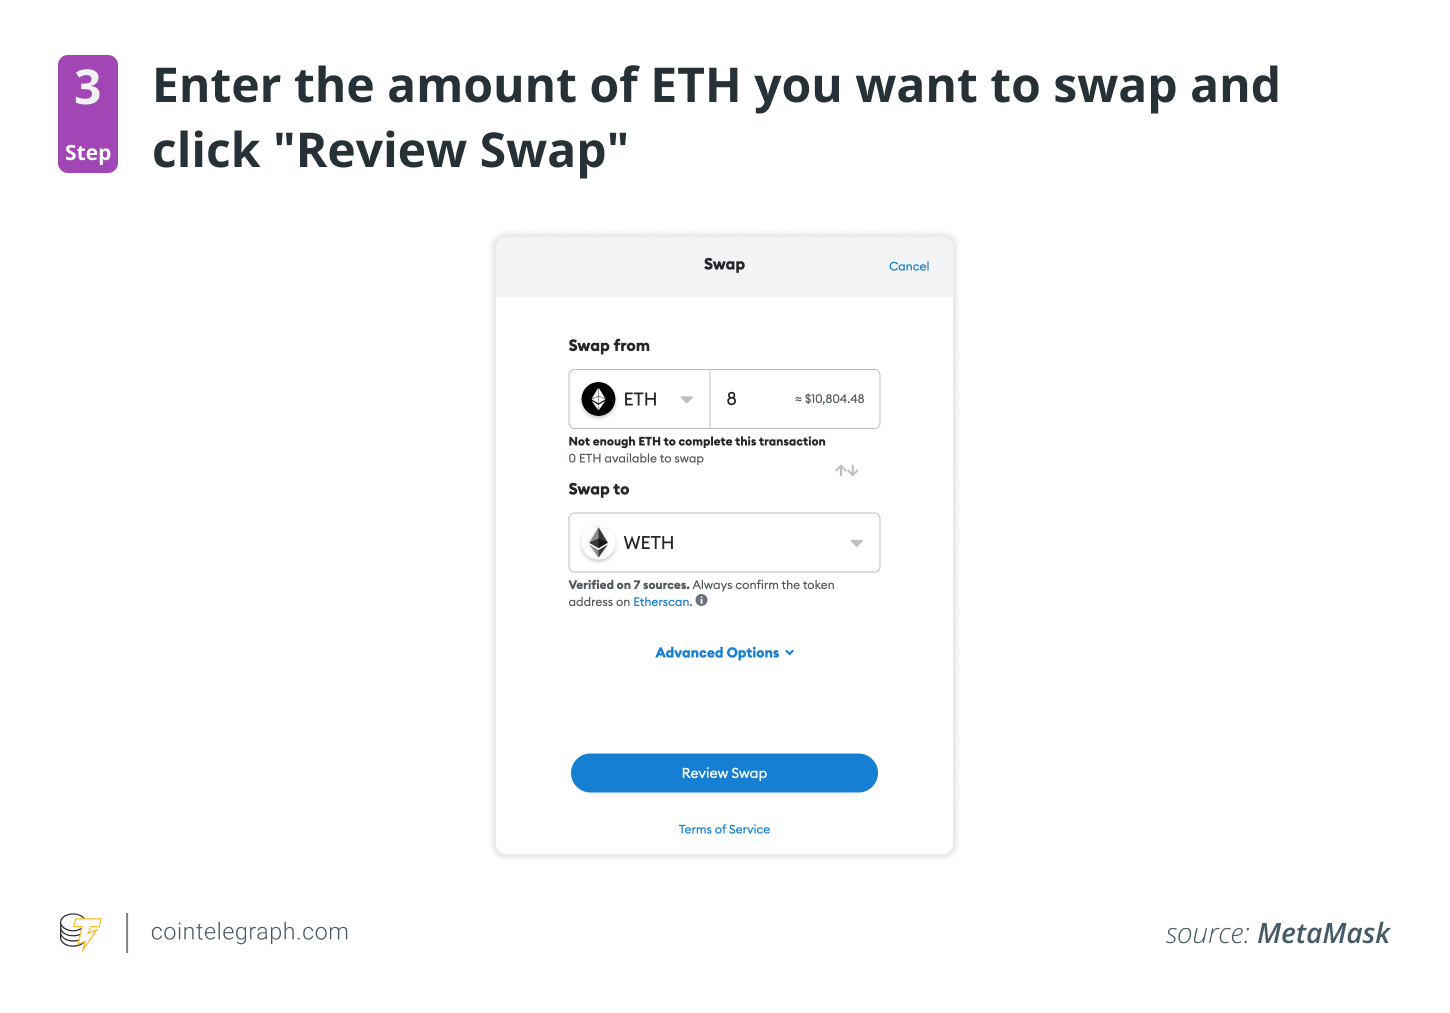 Enter the amount of ETH you want to swap and click Review Swap